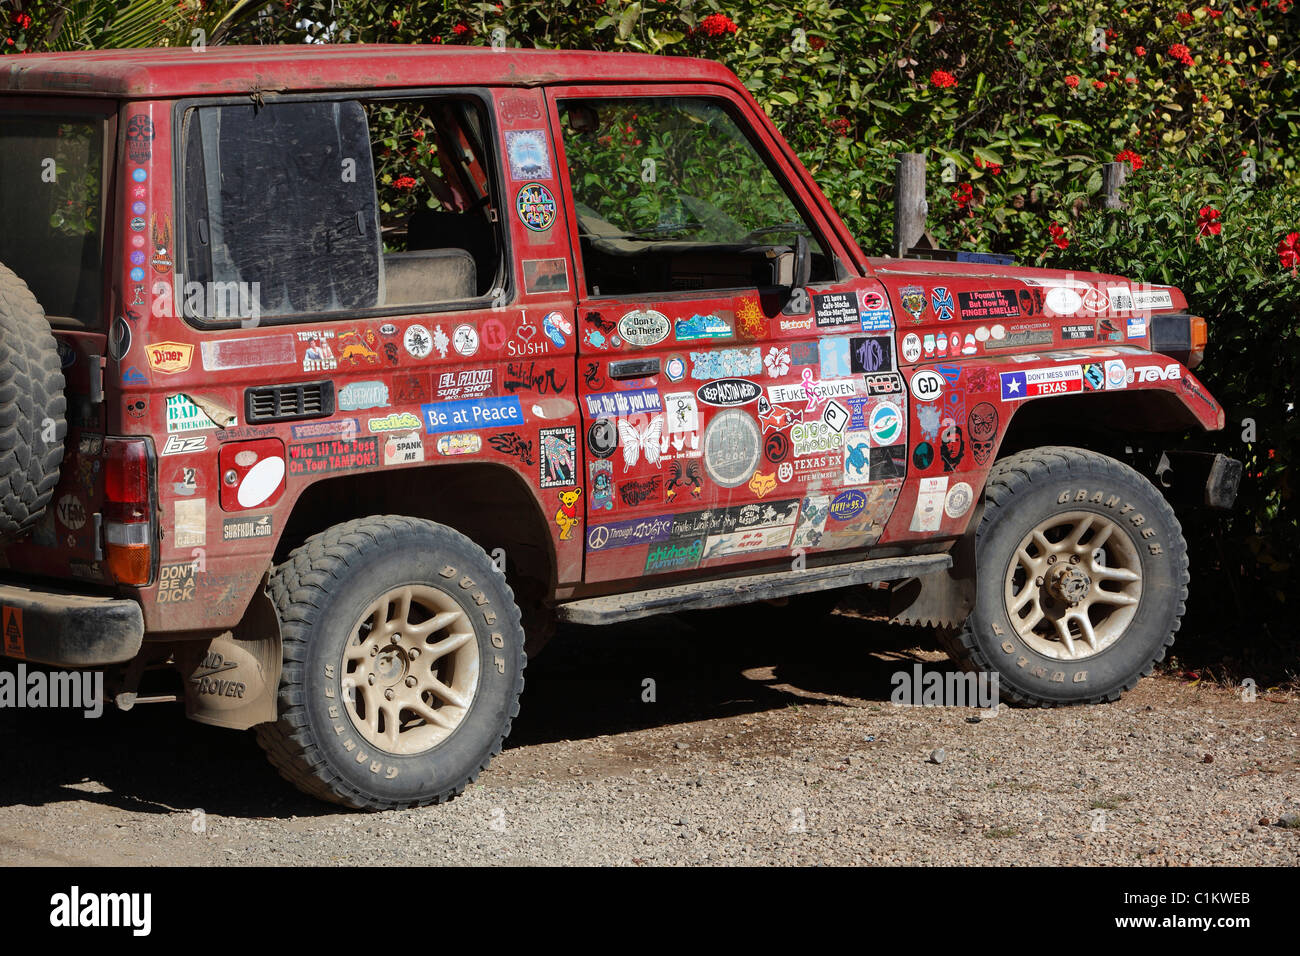 4x4 surfer's vehicle covered in bumper stickers Stock Photo